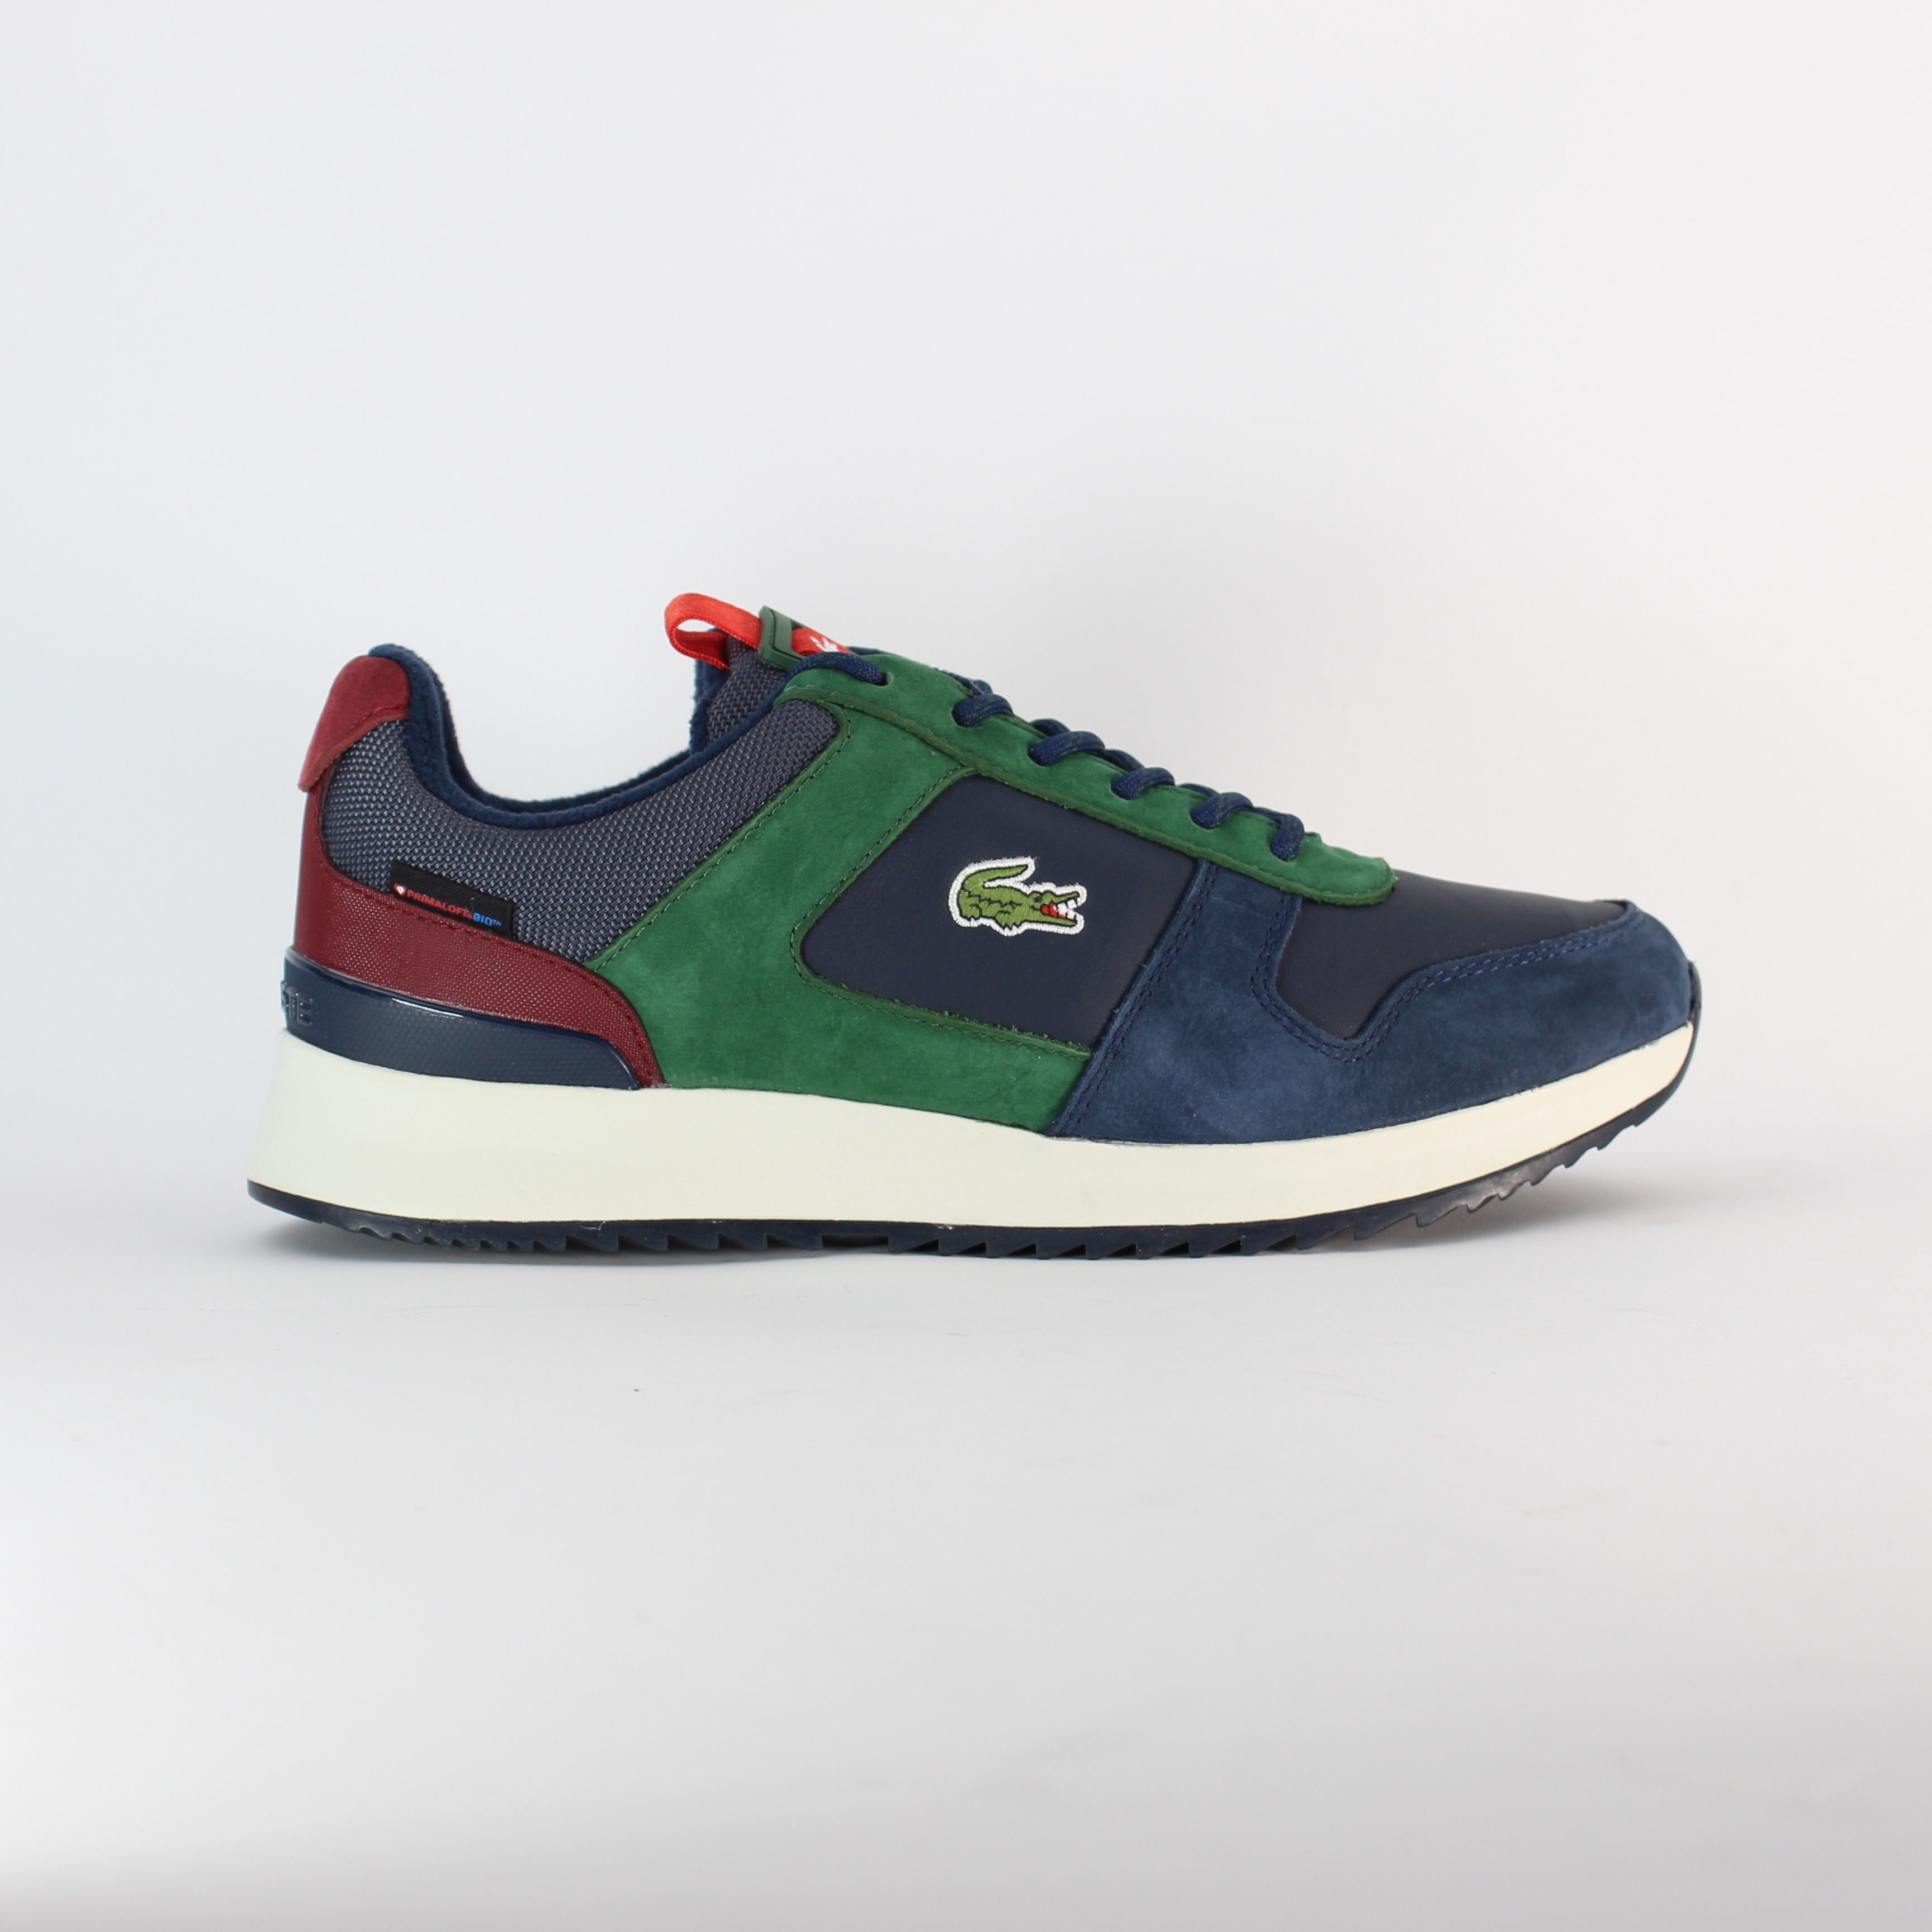 LACOSTE - JOGGEUR - NAVY/GREEN